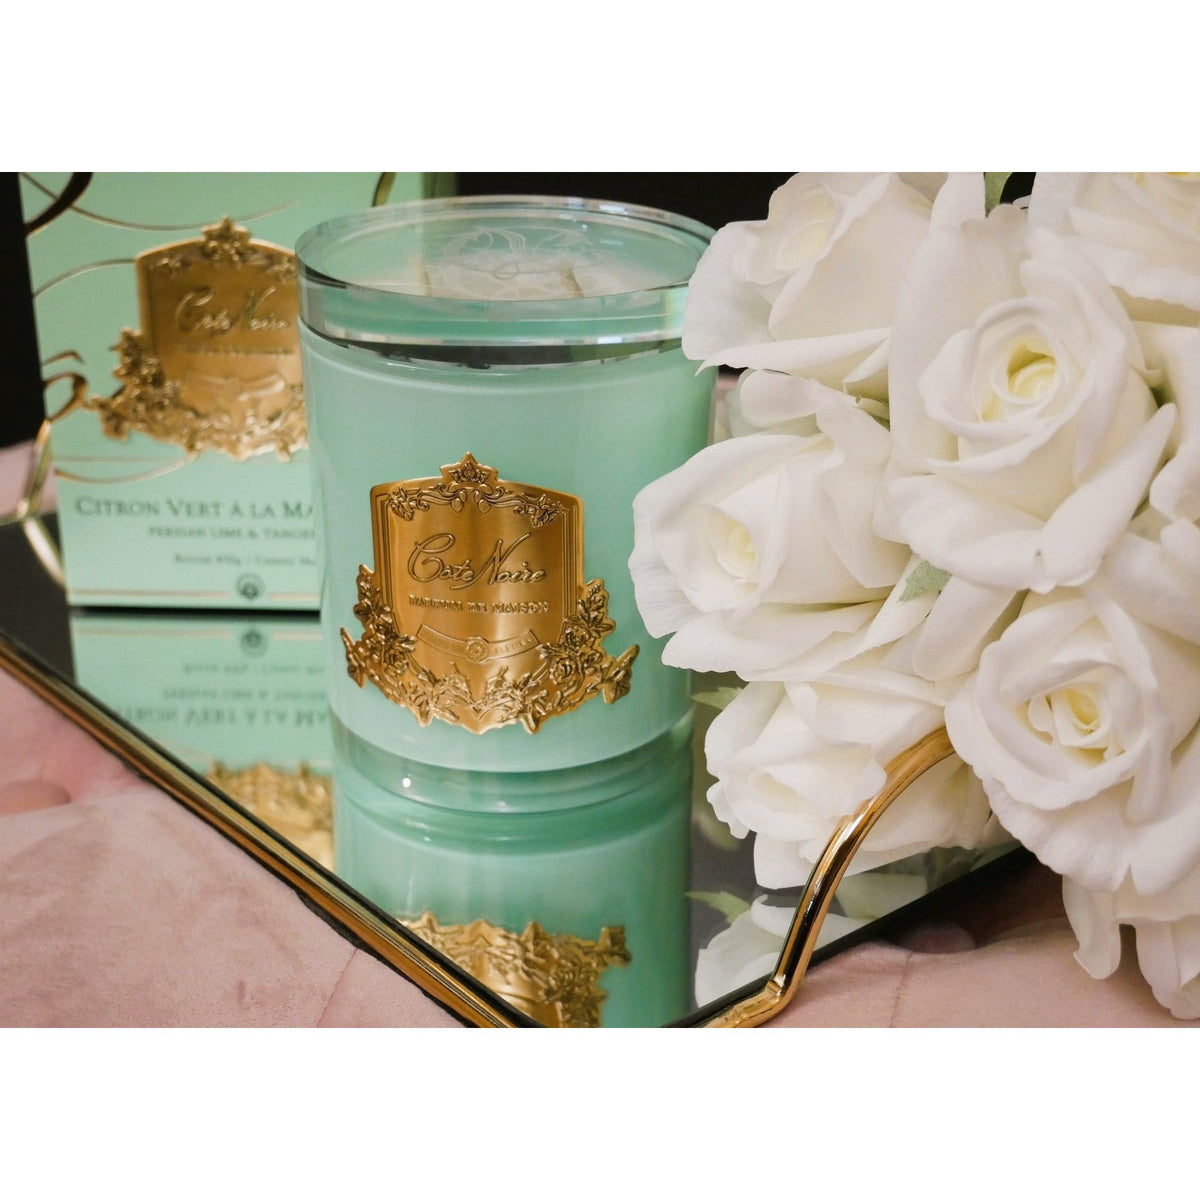 COTE NOIRE | PERSIAN LIME - JADE VESSEL - GOLD BADGE - LIMITED EDITION